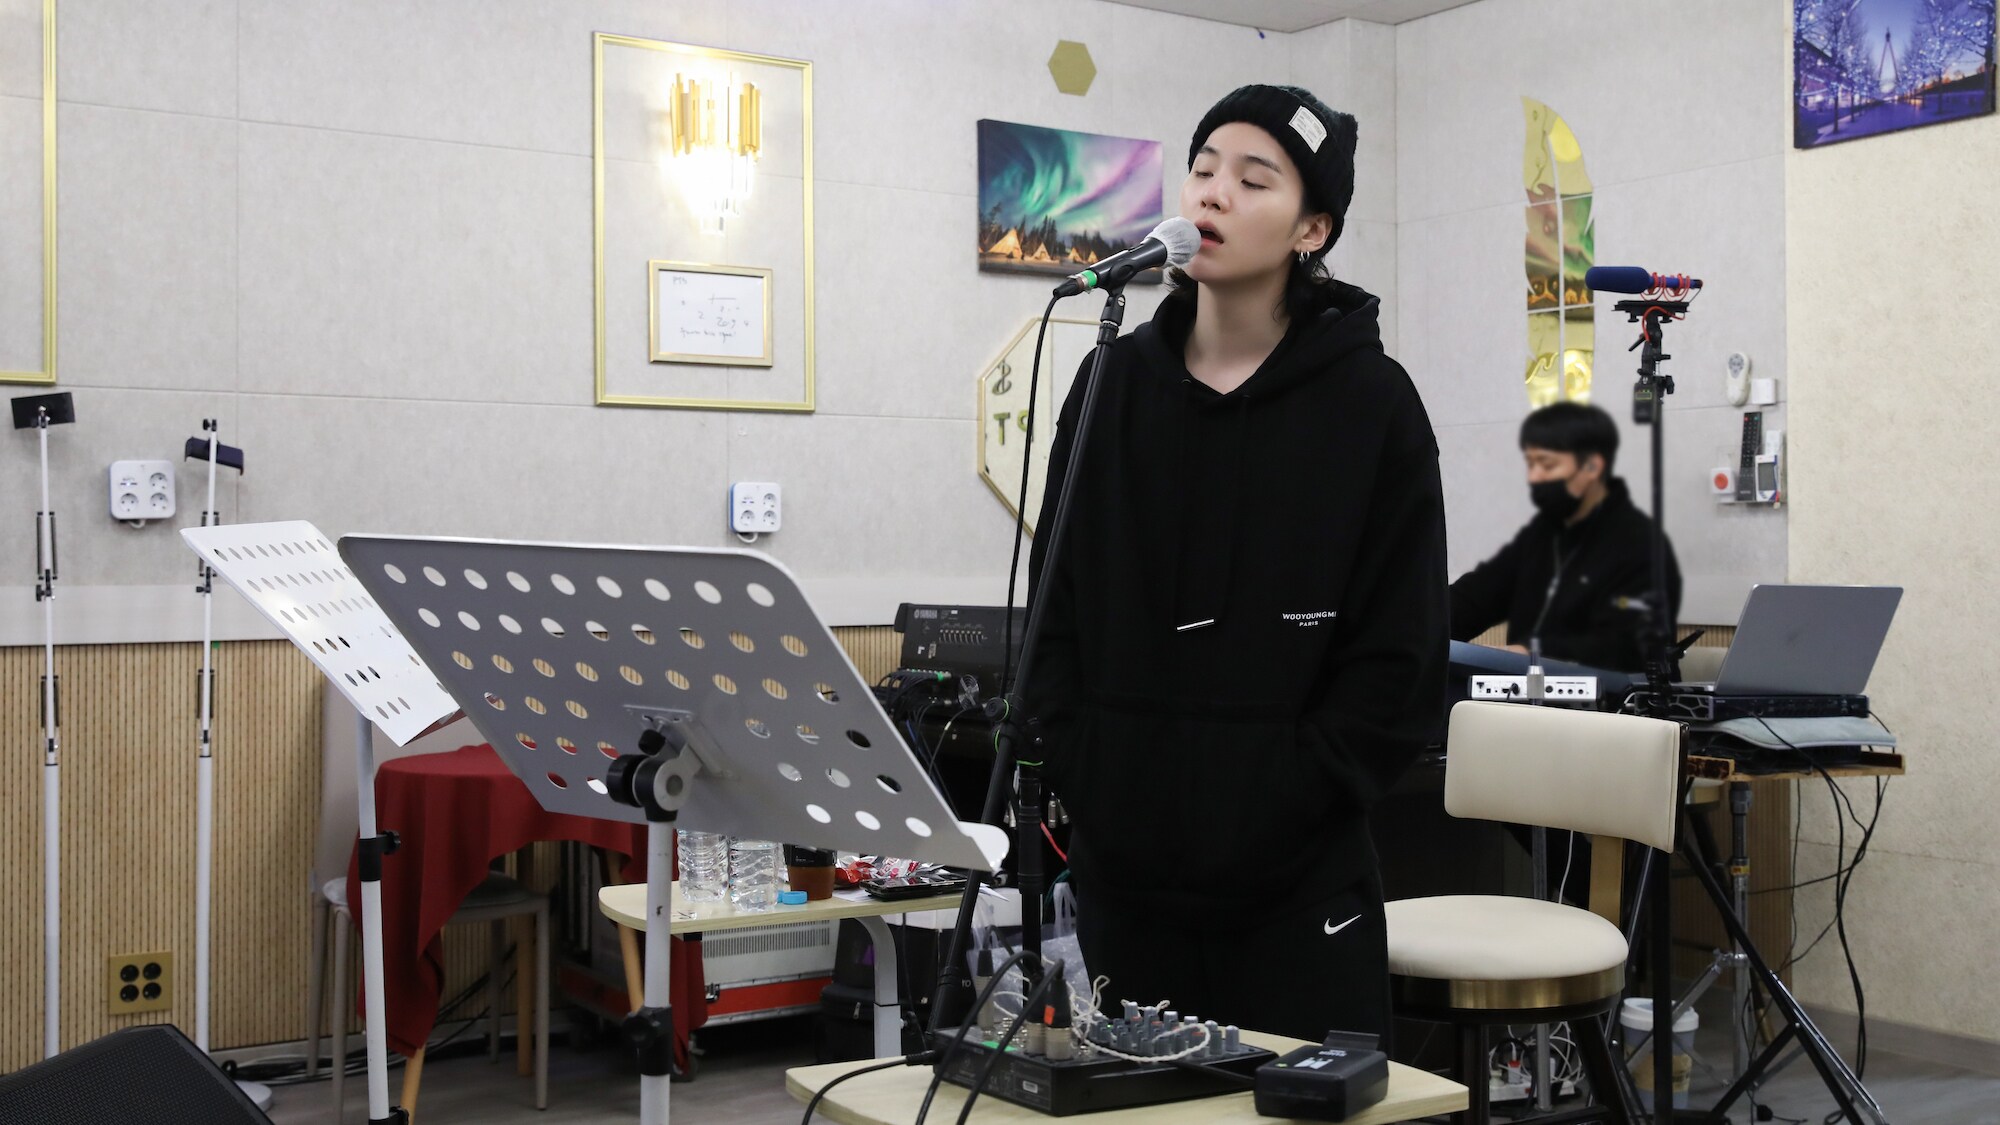 In “SUGA: Road to D-DAY,” viewers will see the BTS star searching for musical inspiration for his upcoming album D-DAY. Traveling around the world in search of musical inspiration, SUGA will be at his most vulnerable as he discusses his writer’s block with other musicians, and delves deep into his most traumatic memories to pen lyrics for several of his latest songs.